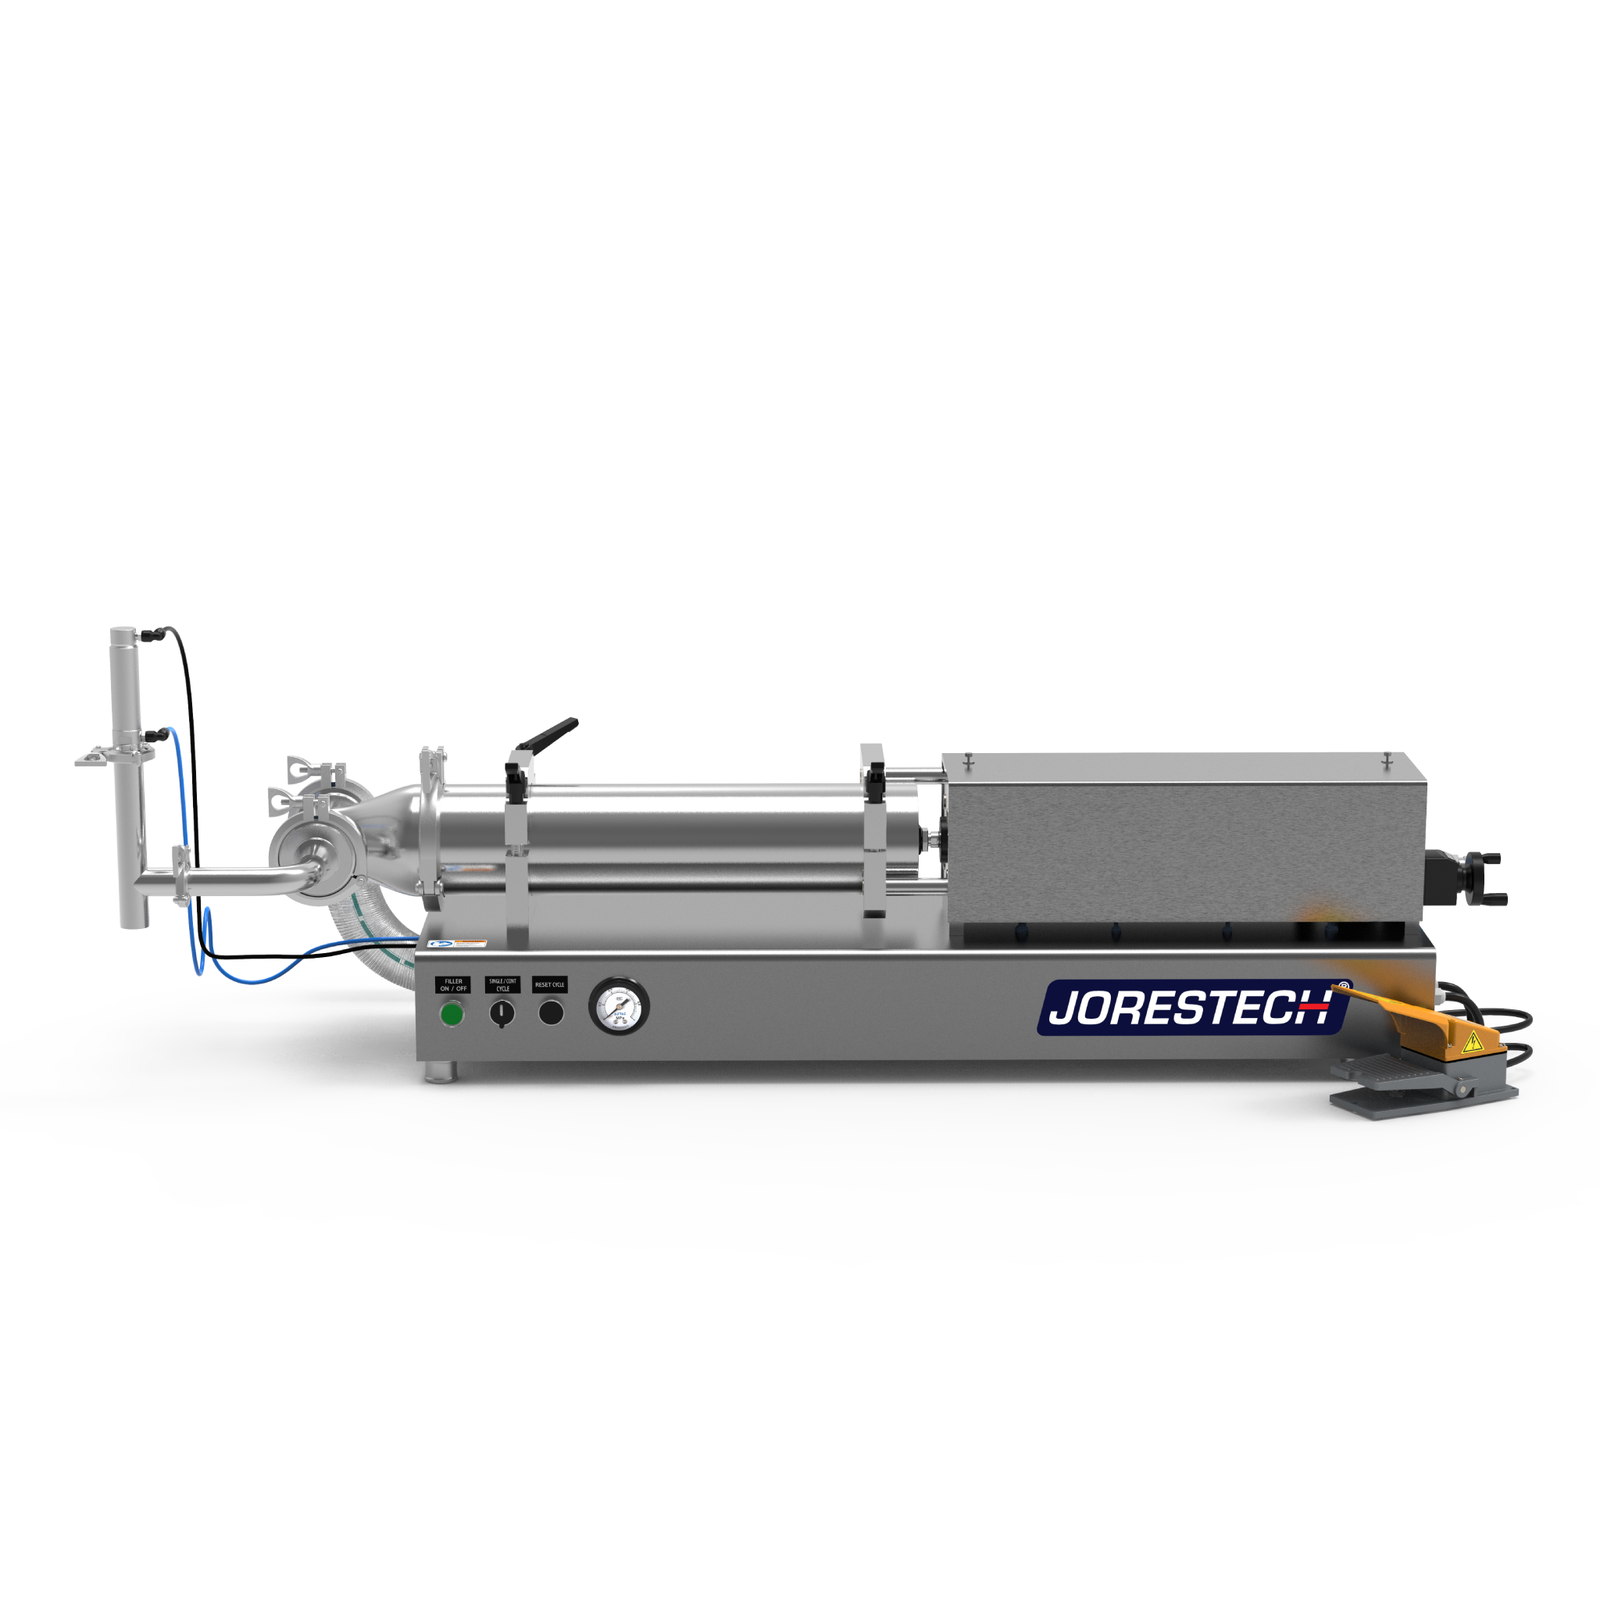 Low viscosity JORES TECHNOLOGIES® piston filling machine in a frontal. The piston filler is made out of stainless steel and there's a yellow and grey foot pedal resting on the side.